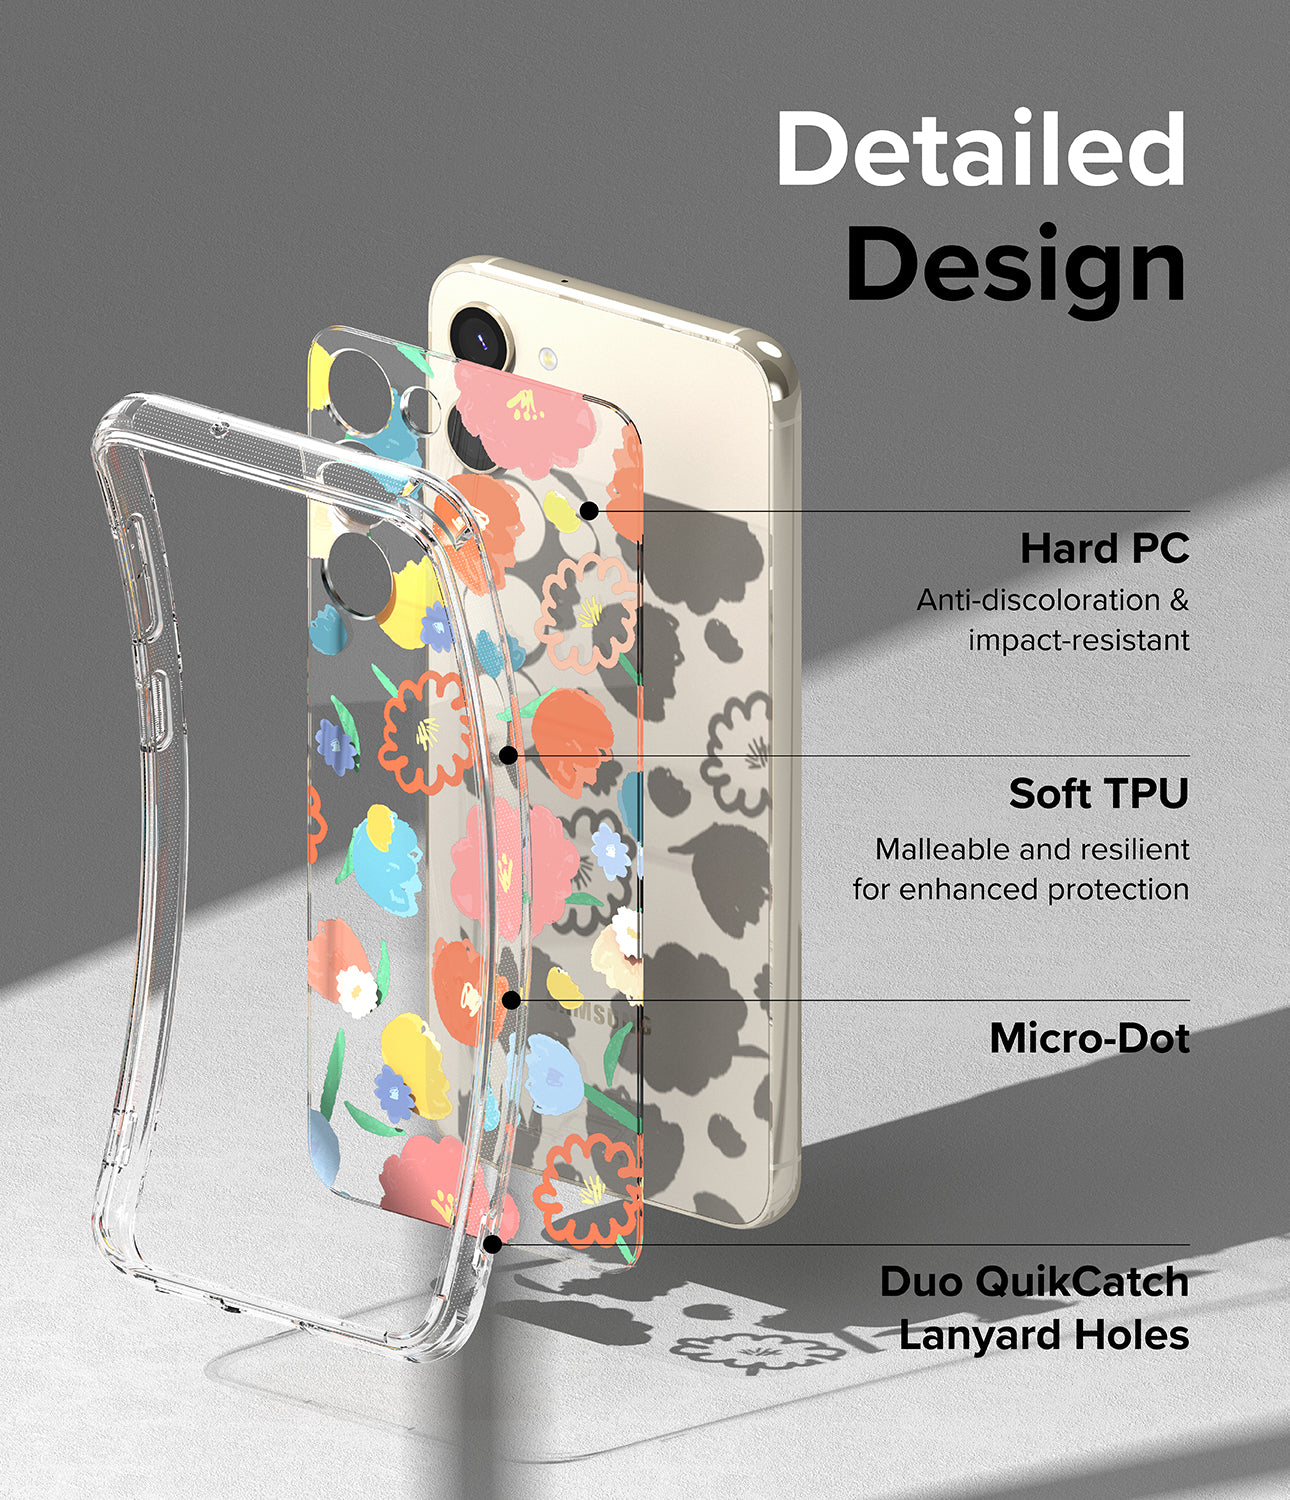 Galaxy S23 Plus Case | Fusion Design Floral - Detailed Design. Anti-discoloration and impact-resistant with Hard PC. Malleable and resilient for enhanced protection with Soft TPU. Micro-Dot. Duo QuikCatch Lanyard Holes.